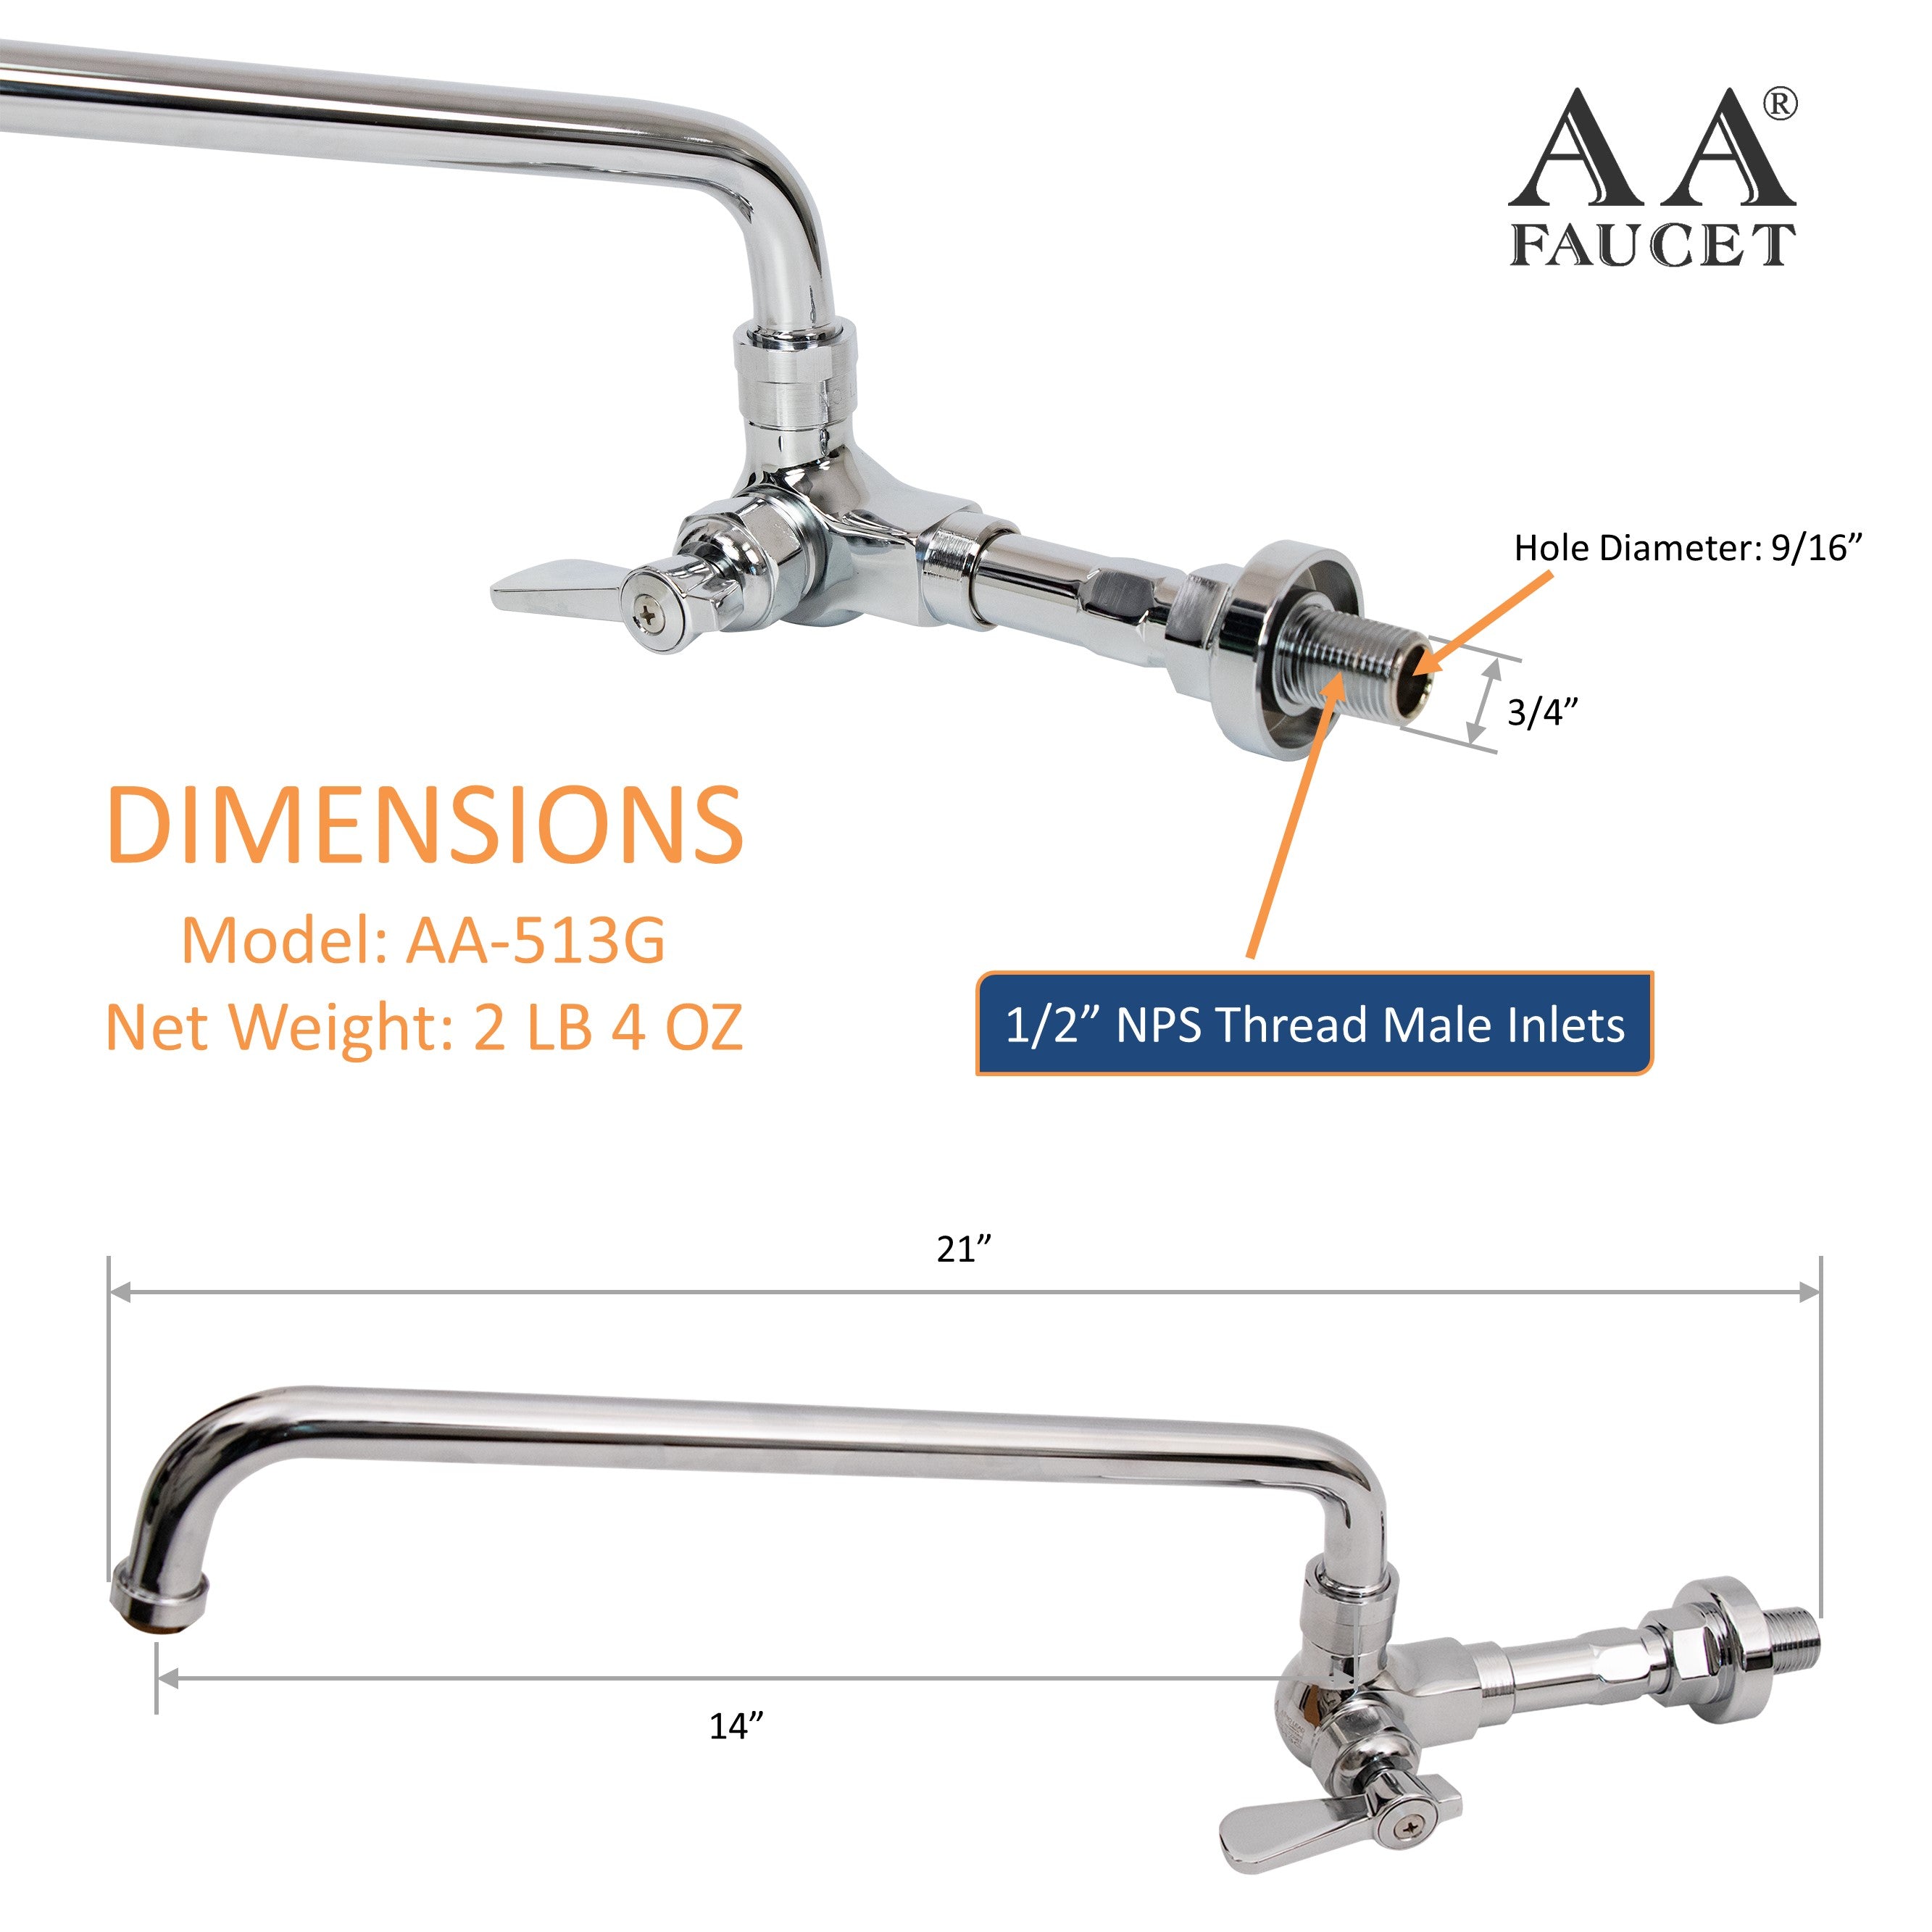 AA Faucet Single Wall Mount Commercial Wok Range Manual Pot Filler Faucet with 14" Swing Spout, Brass Construction Chrome Polished for Restaurant Kitchen NSF Approved